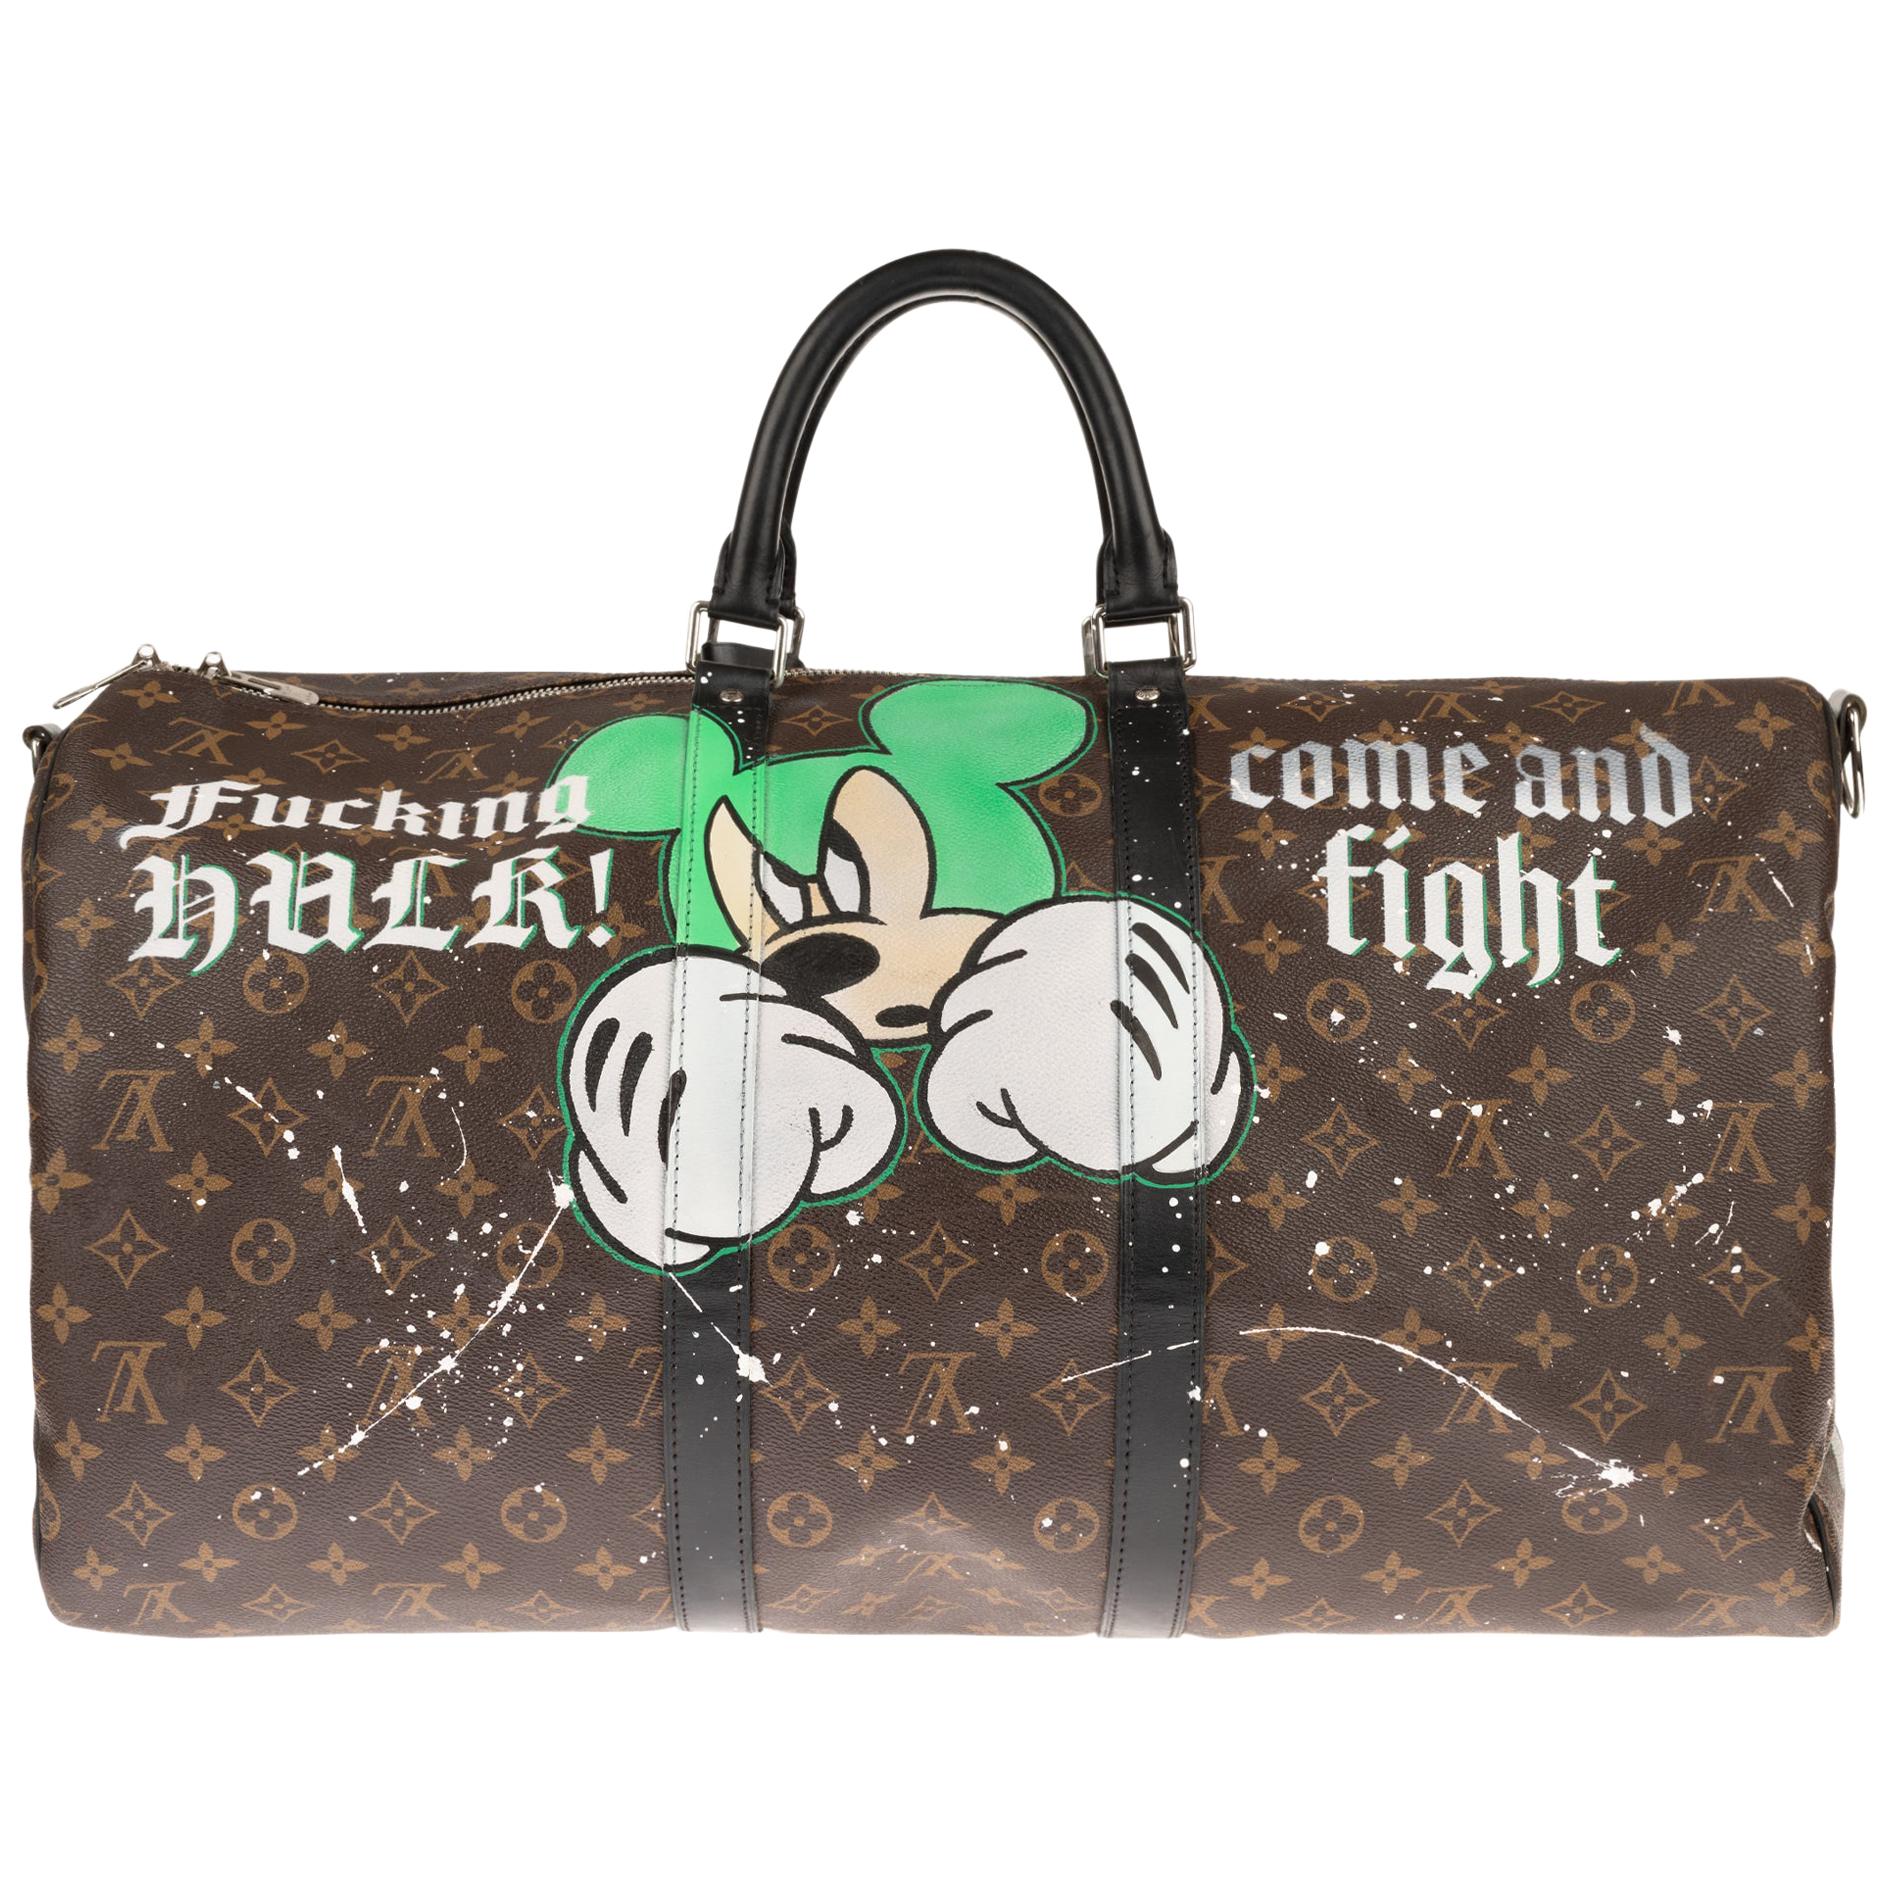 Amazing Travel/Sport bag Louis Vuitton Keepall 55 cm in Monogram canvas customized by the trendy artist of Street Art Patbo entitled 